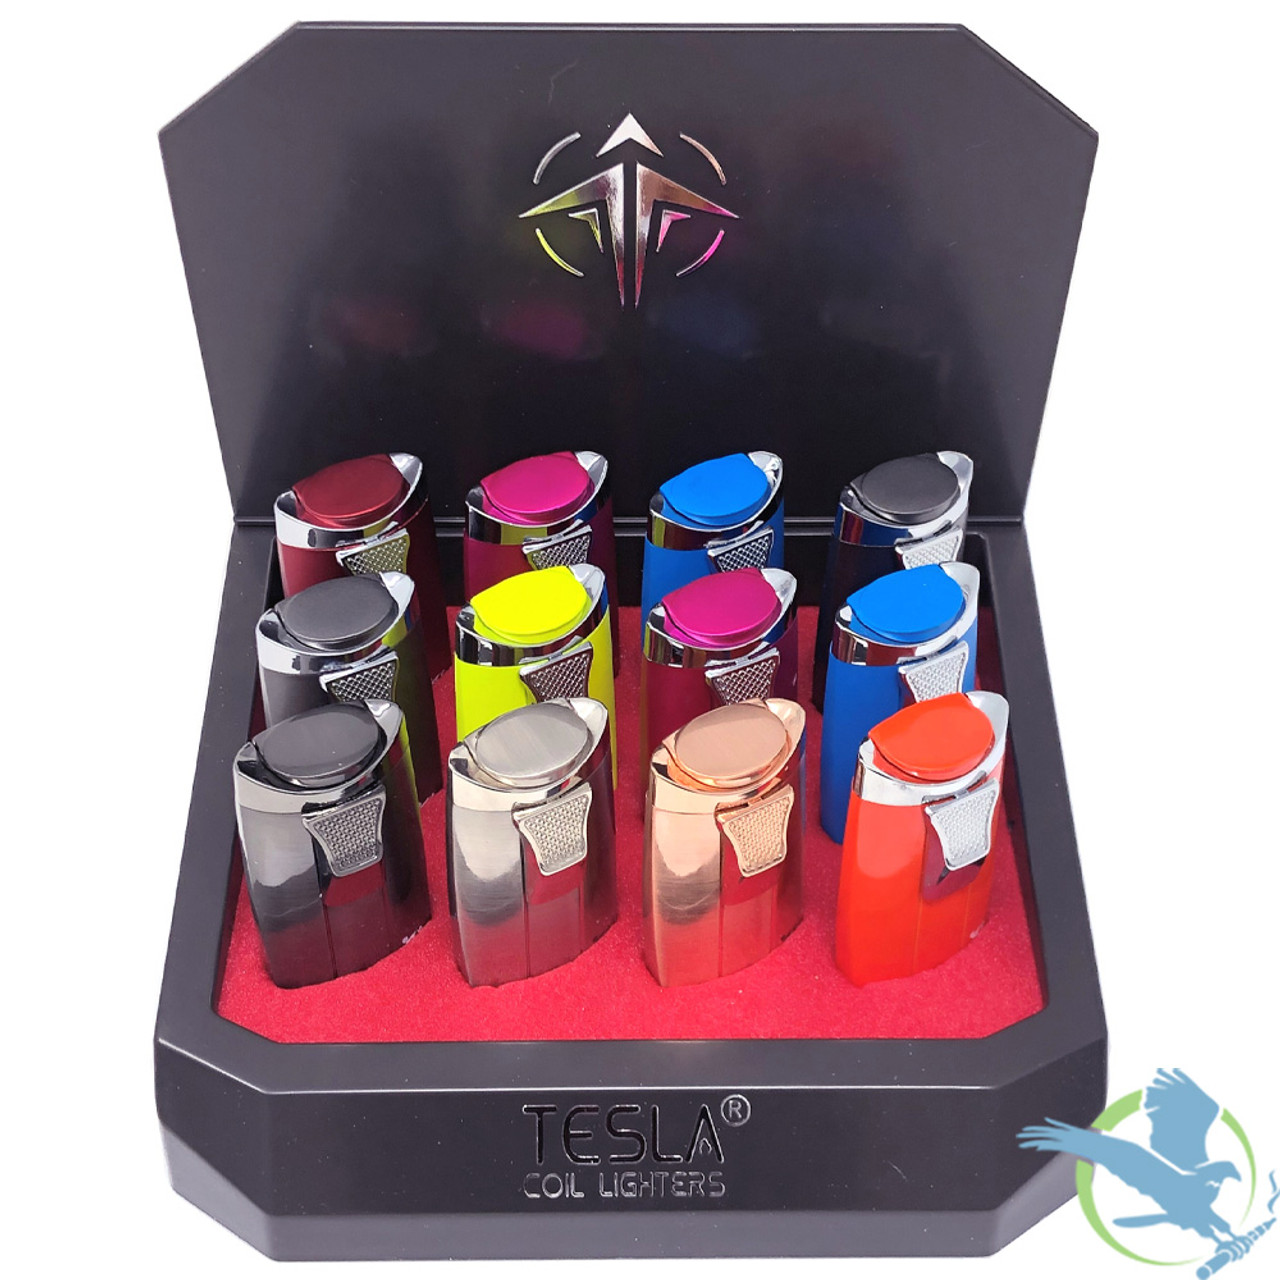 Tesla Coil Lighters Push Up Cap Dual Flame Adjustable Butane Torch Lighter  - Assorted Colors - Display of 12 [61608-T], Lighters & Fuel